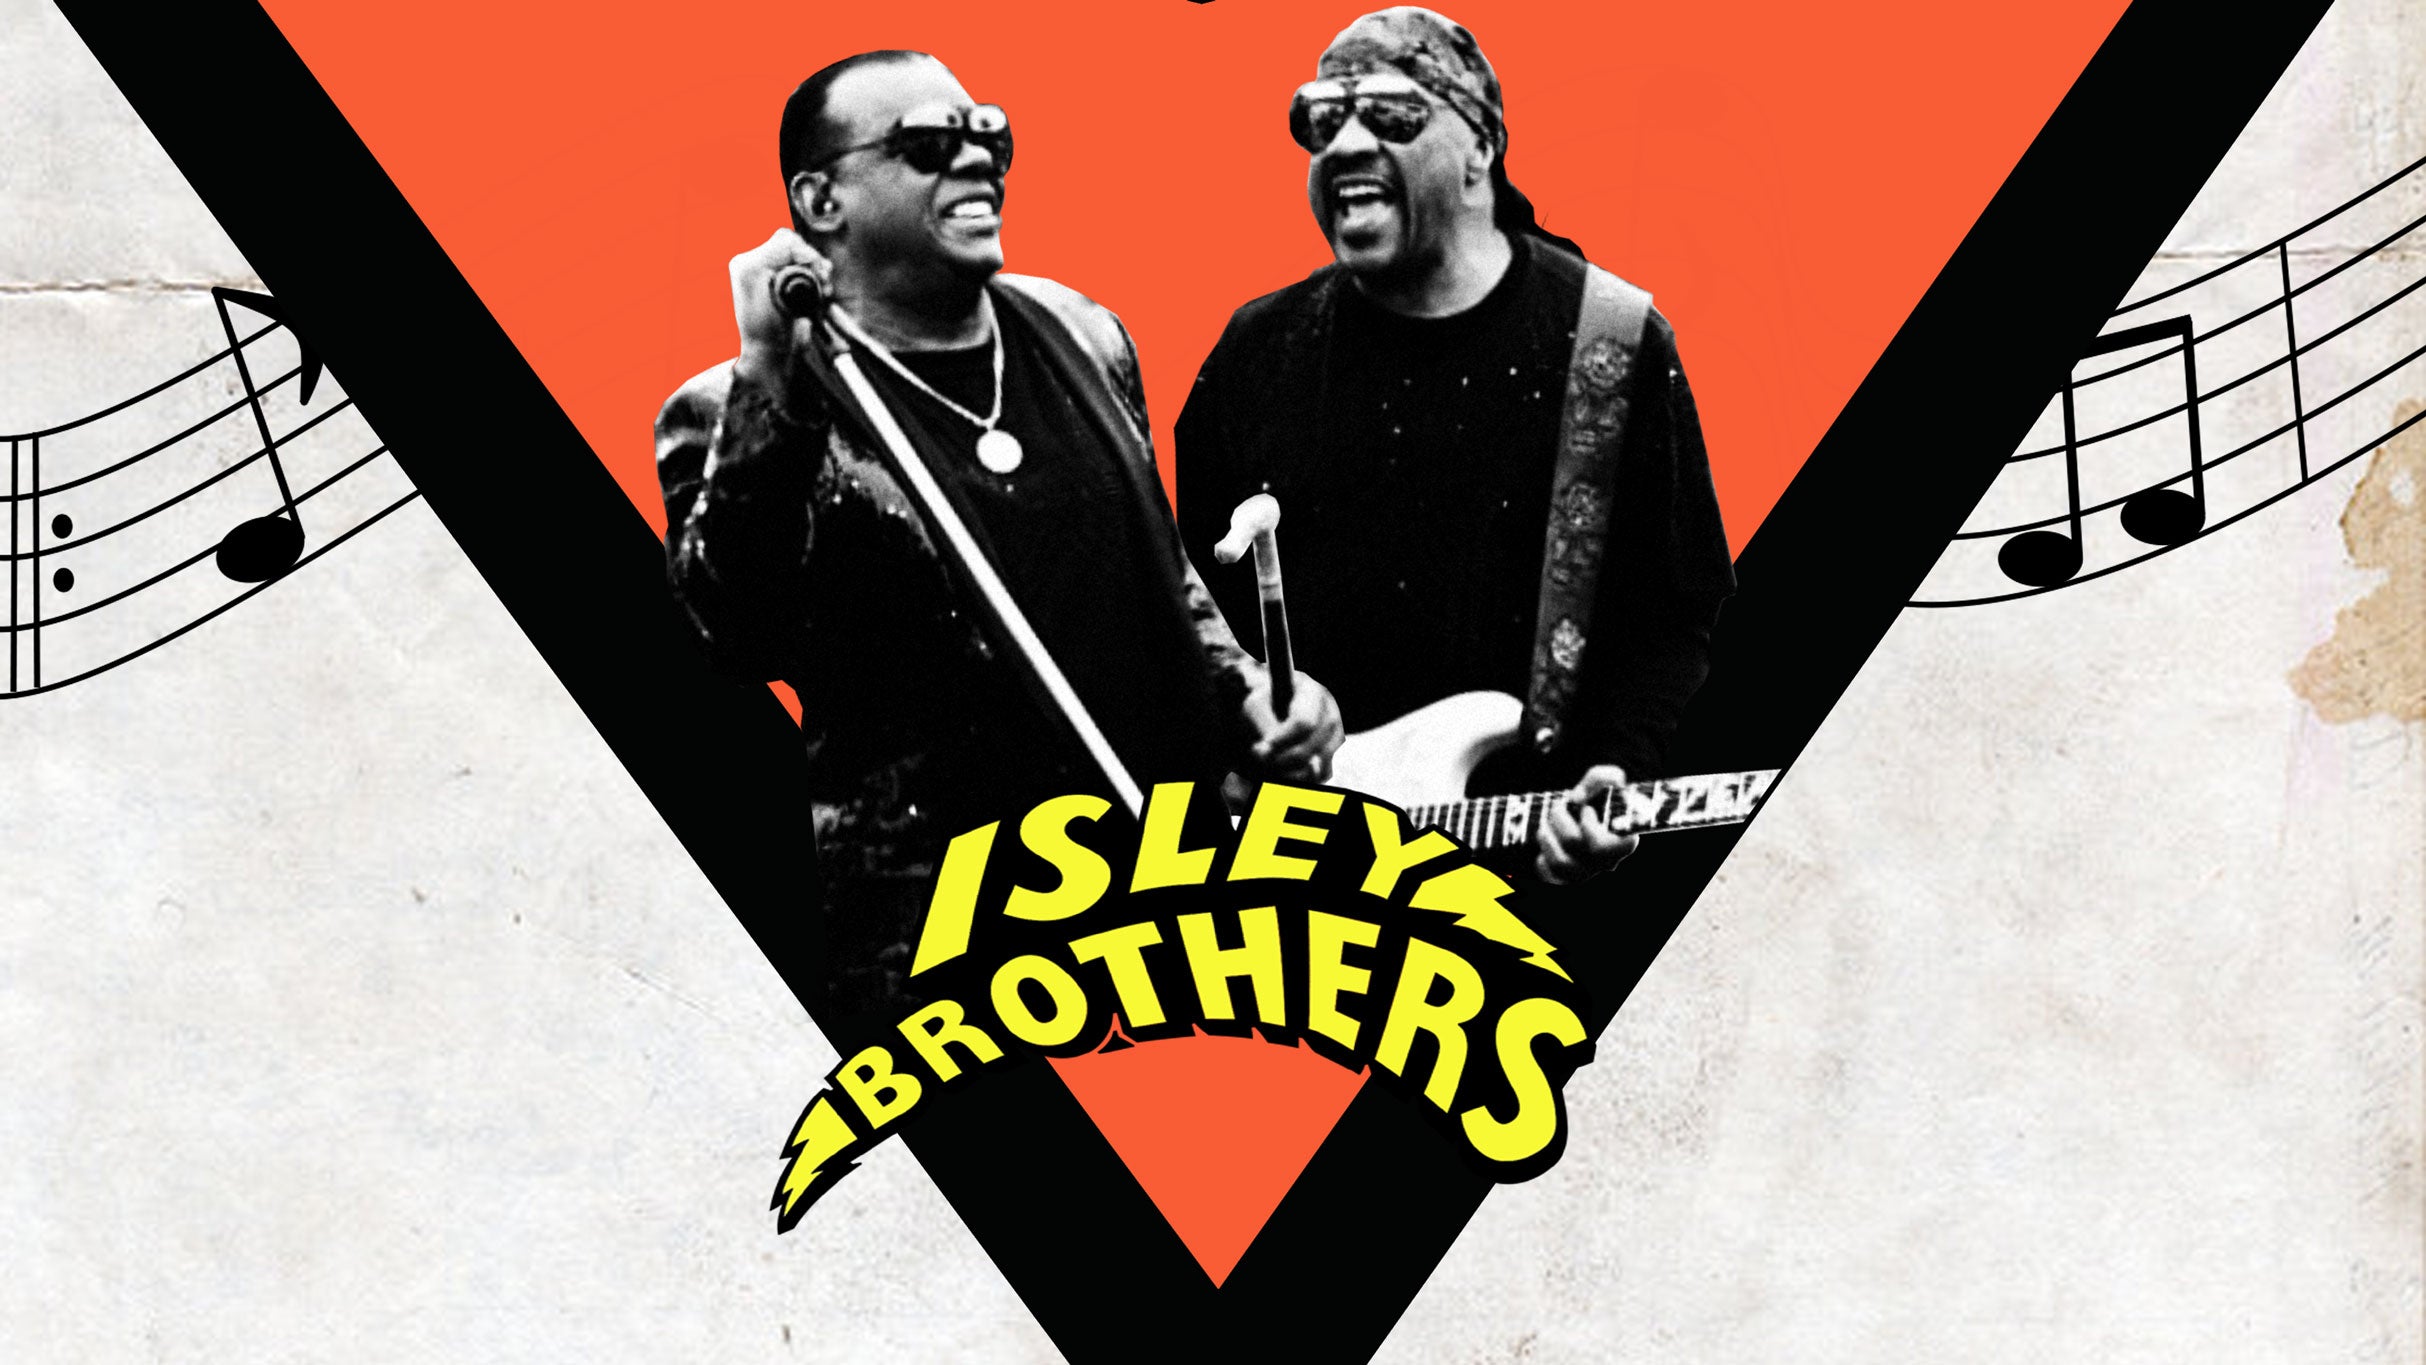 An Evening With The Isley Brothers